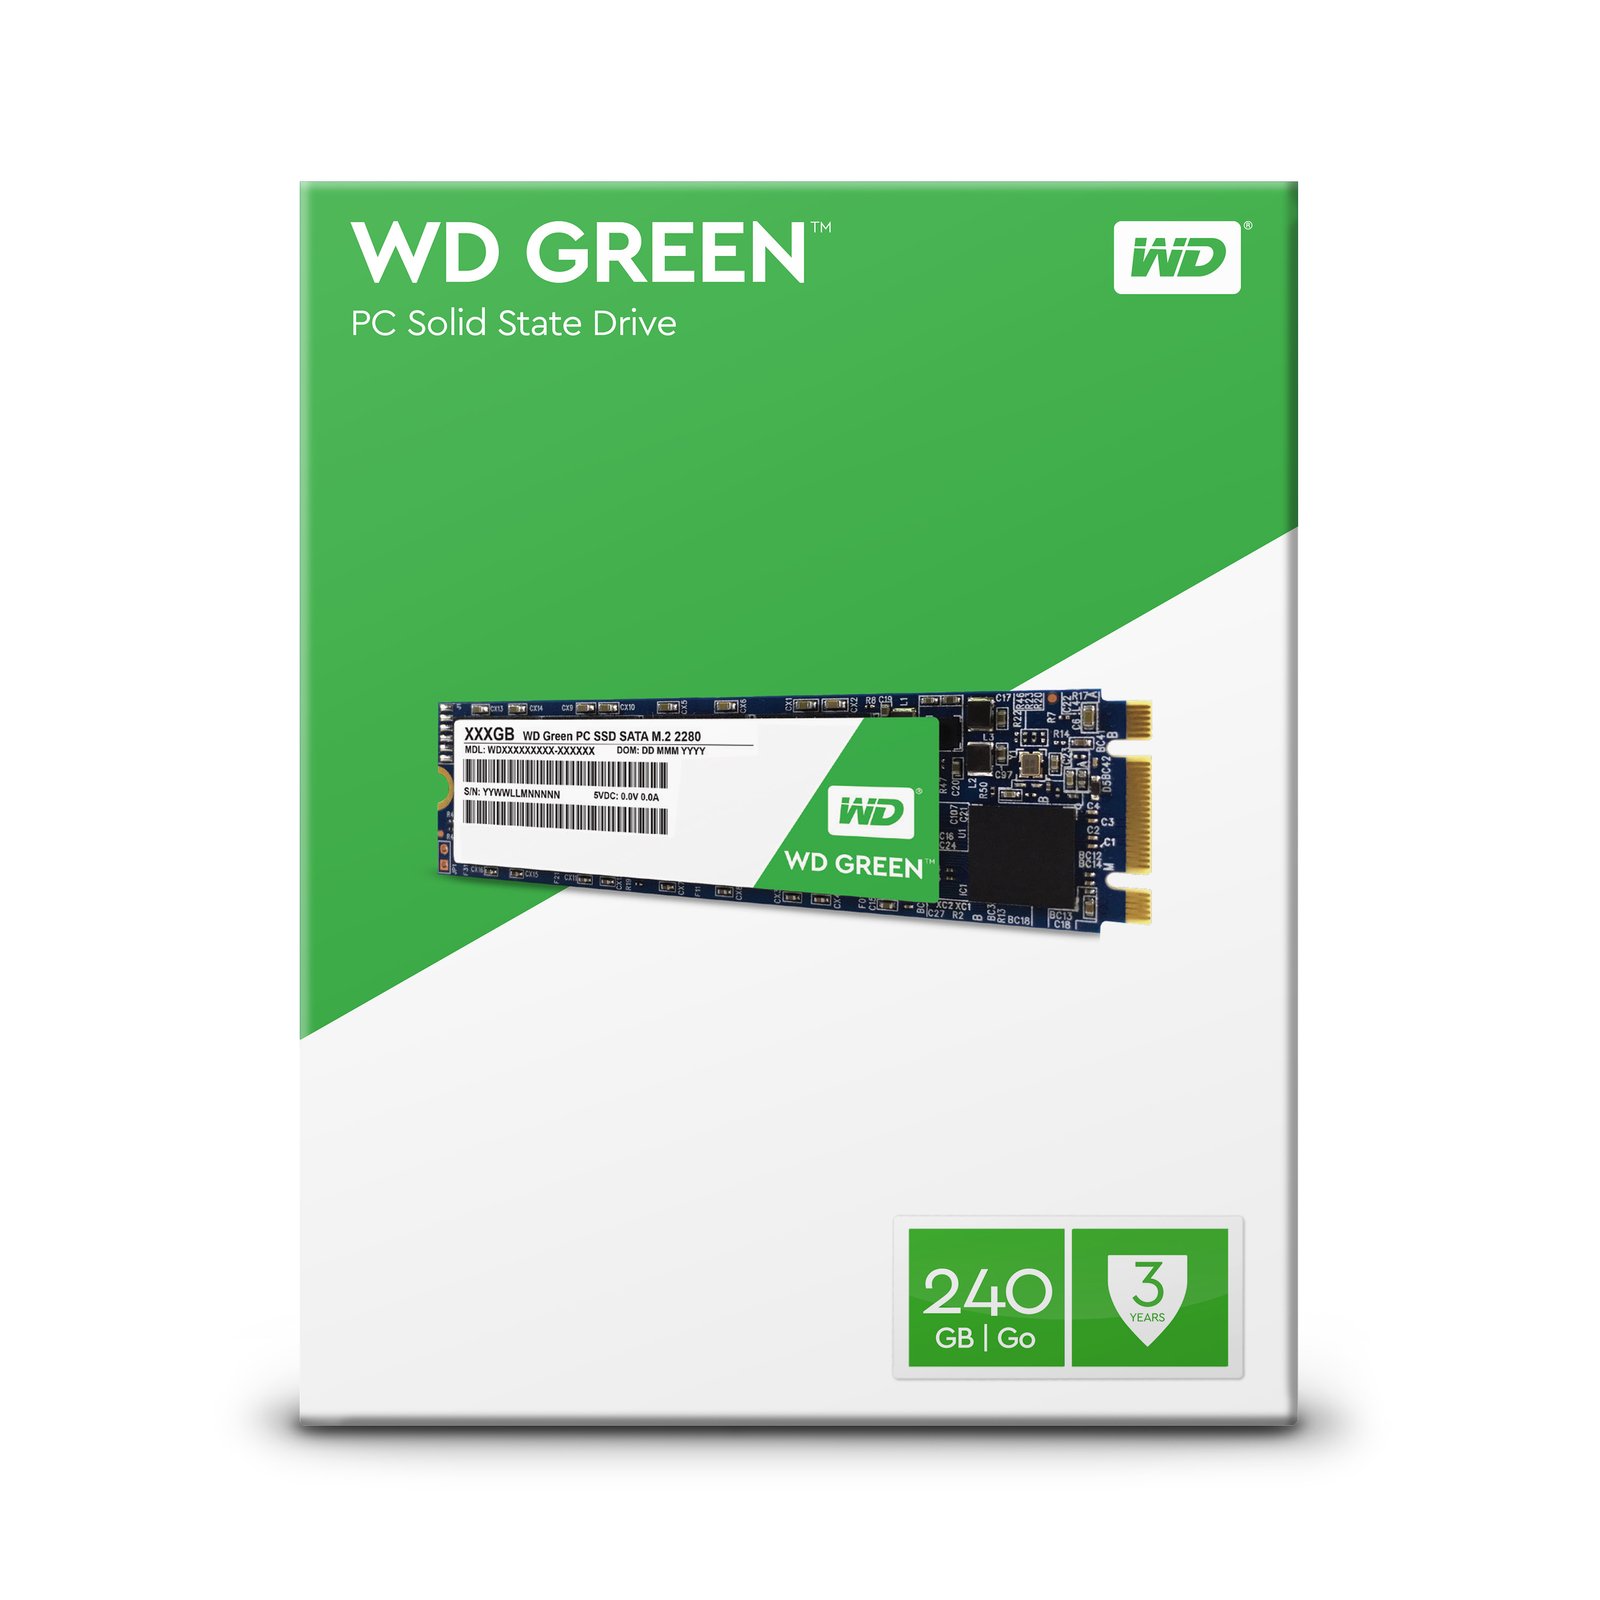 wd-green-1